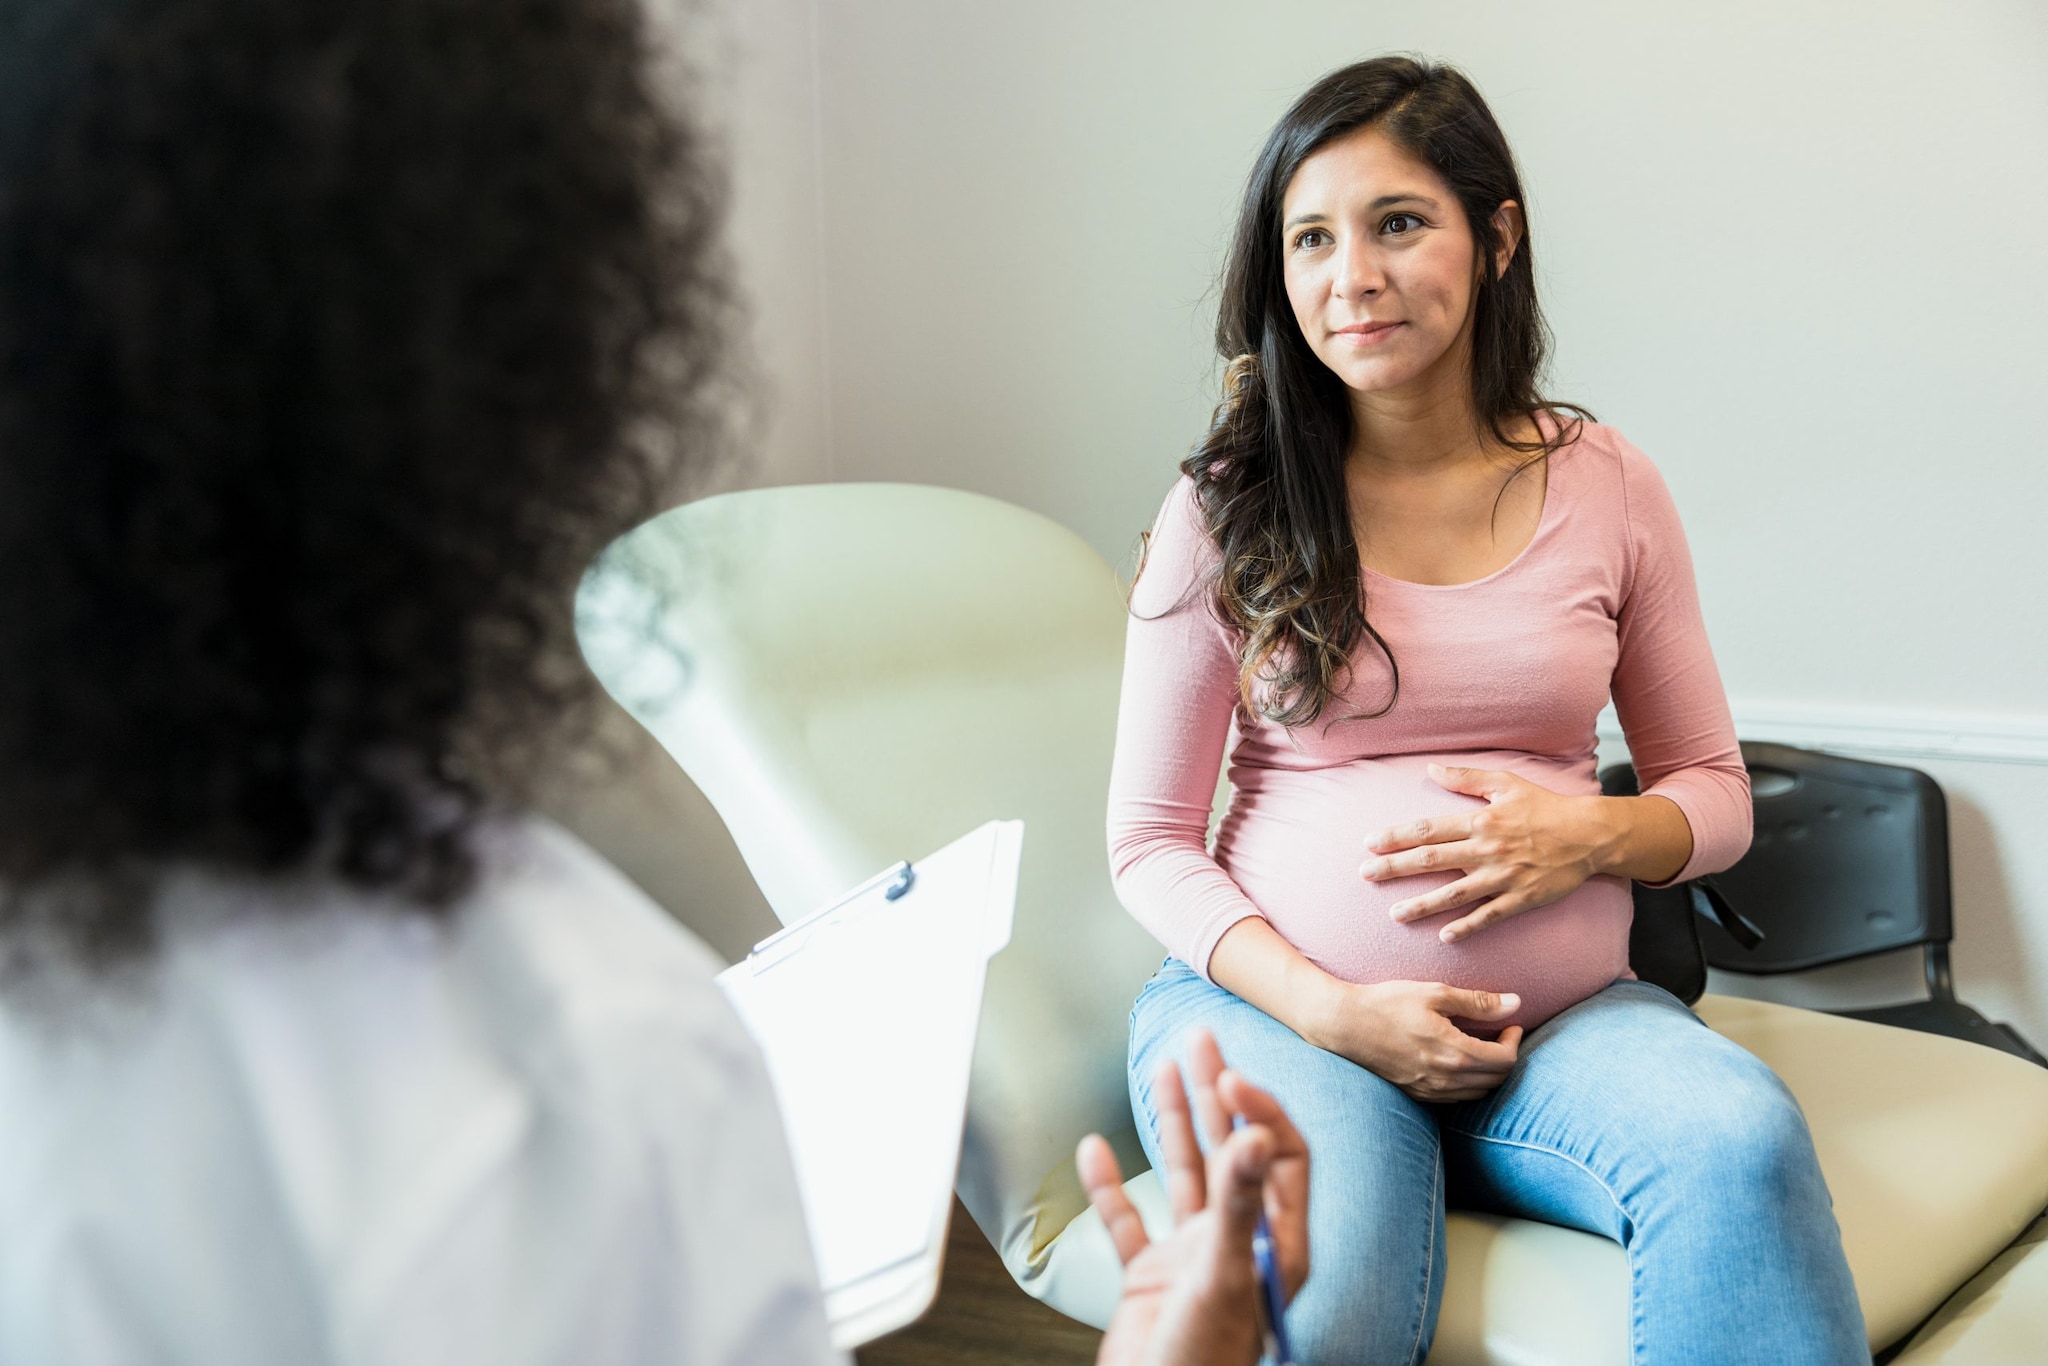 A standing healthcare provider is holding a chart and speaking with a sitting pregnant woman